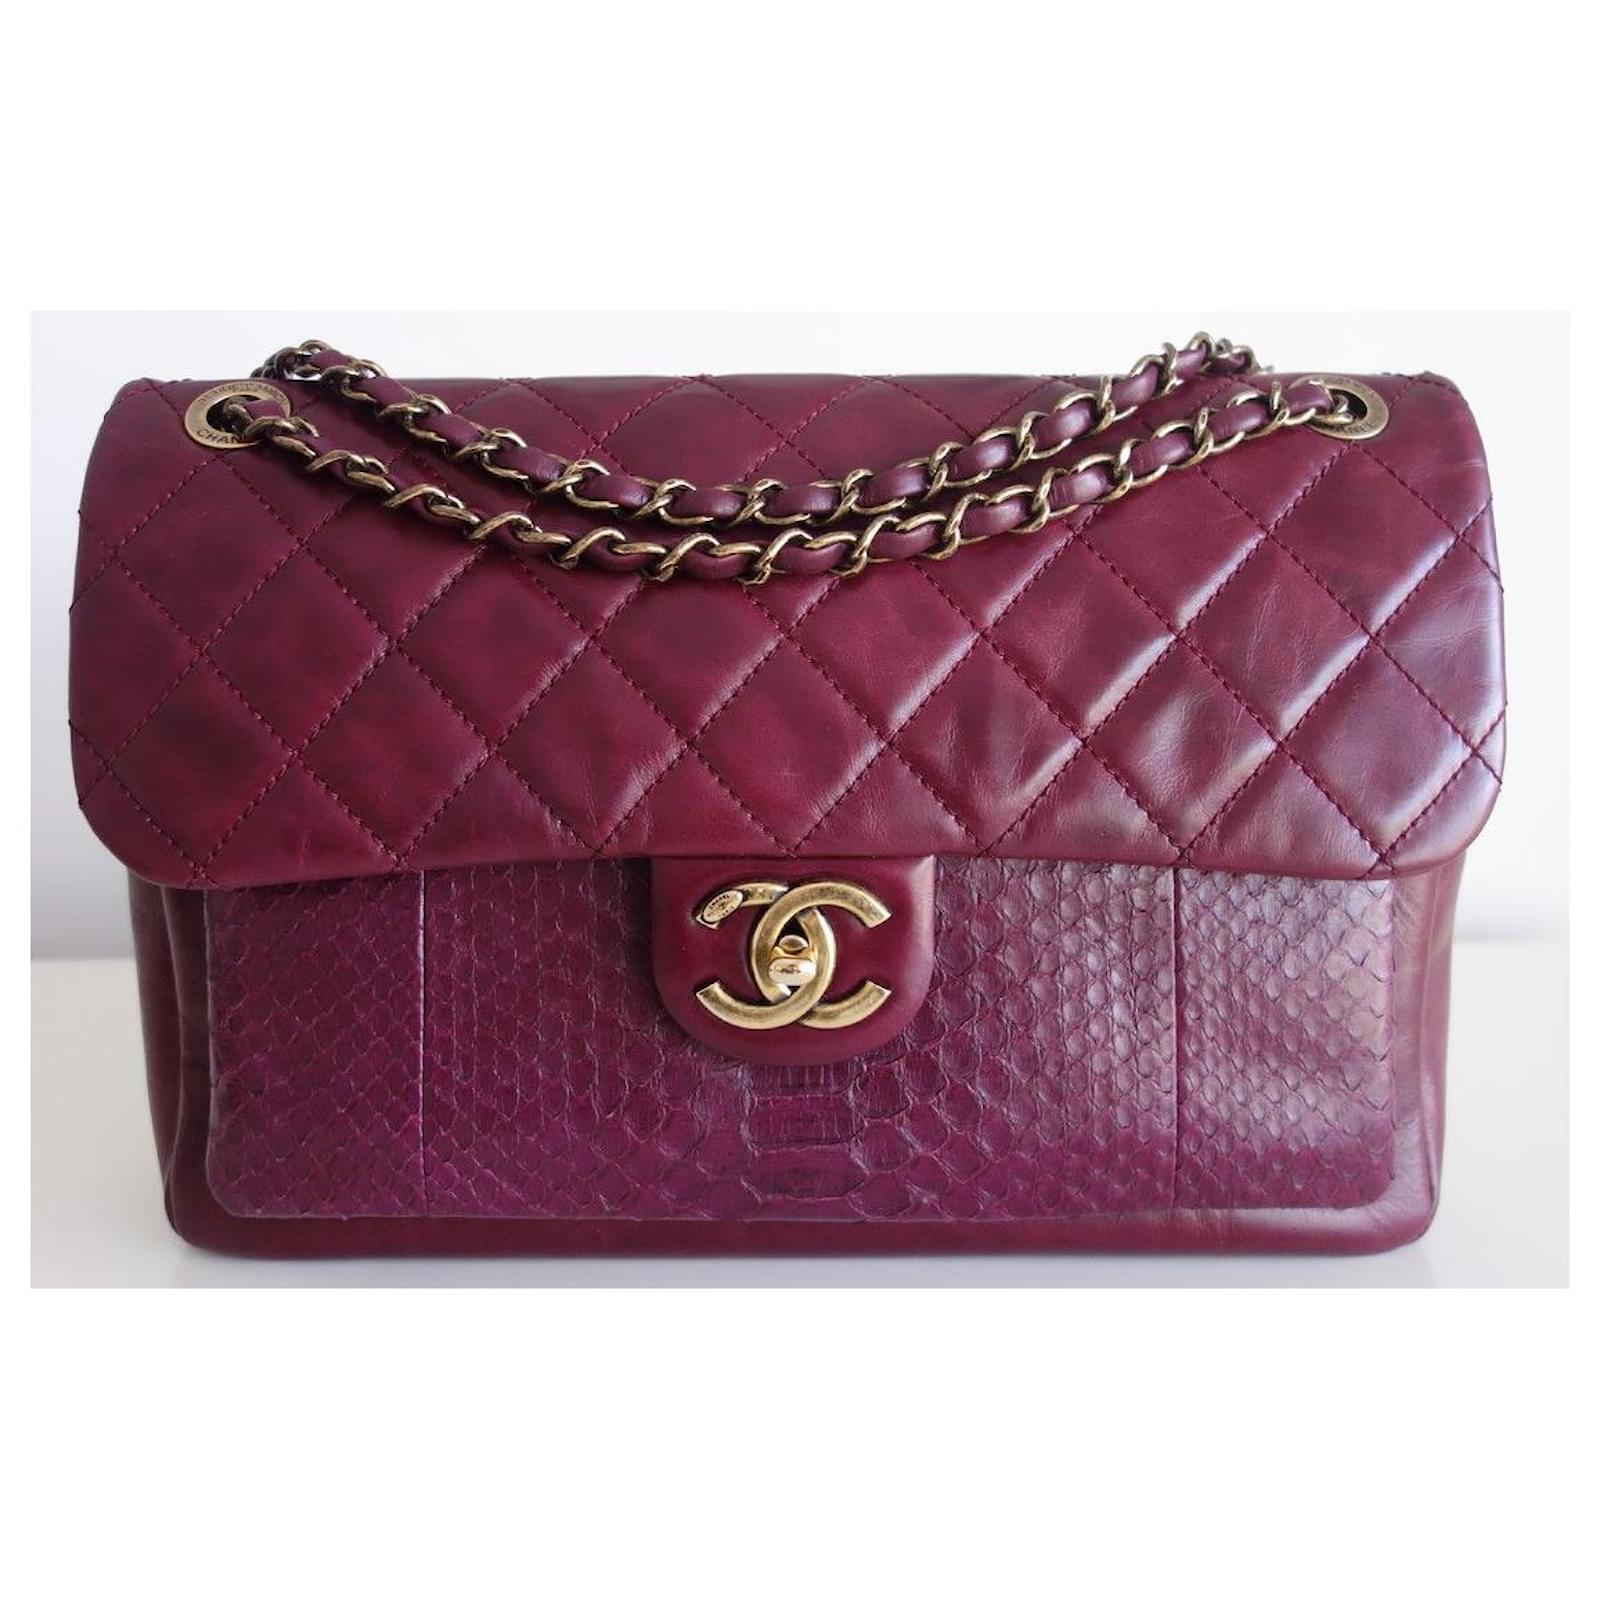 Timeless Classic Chanel bag Gm burgundy Dark red Leather ref